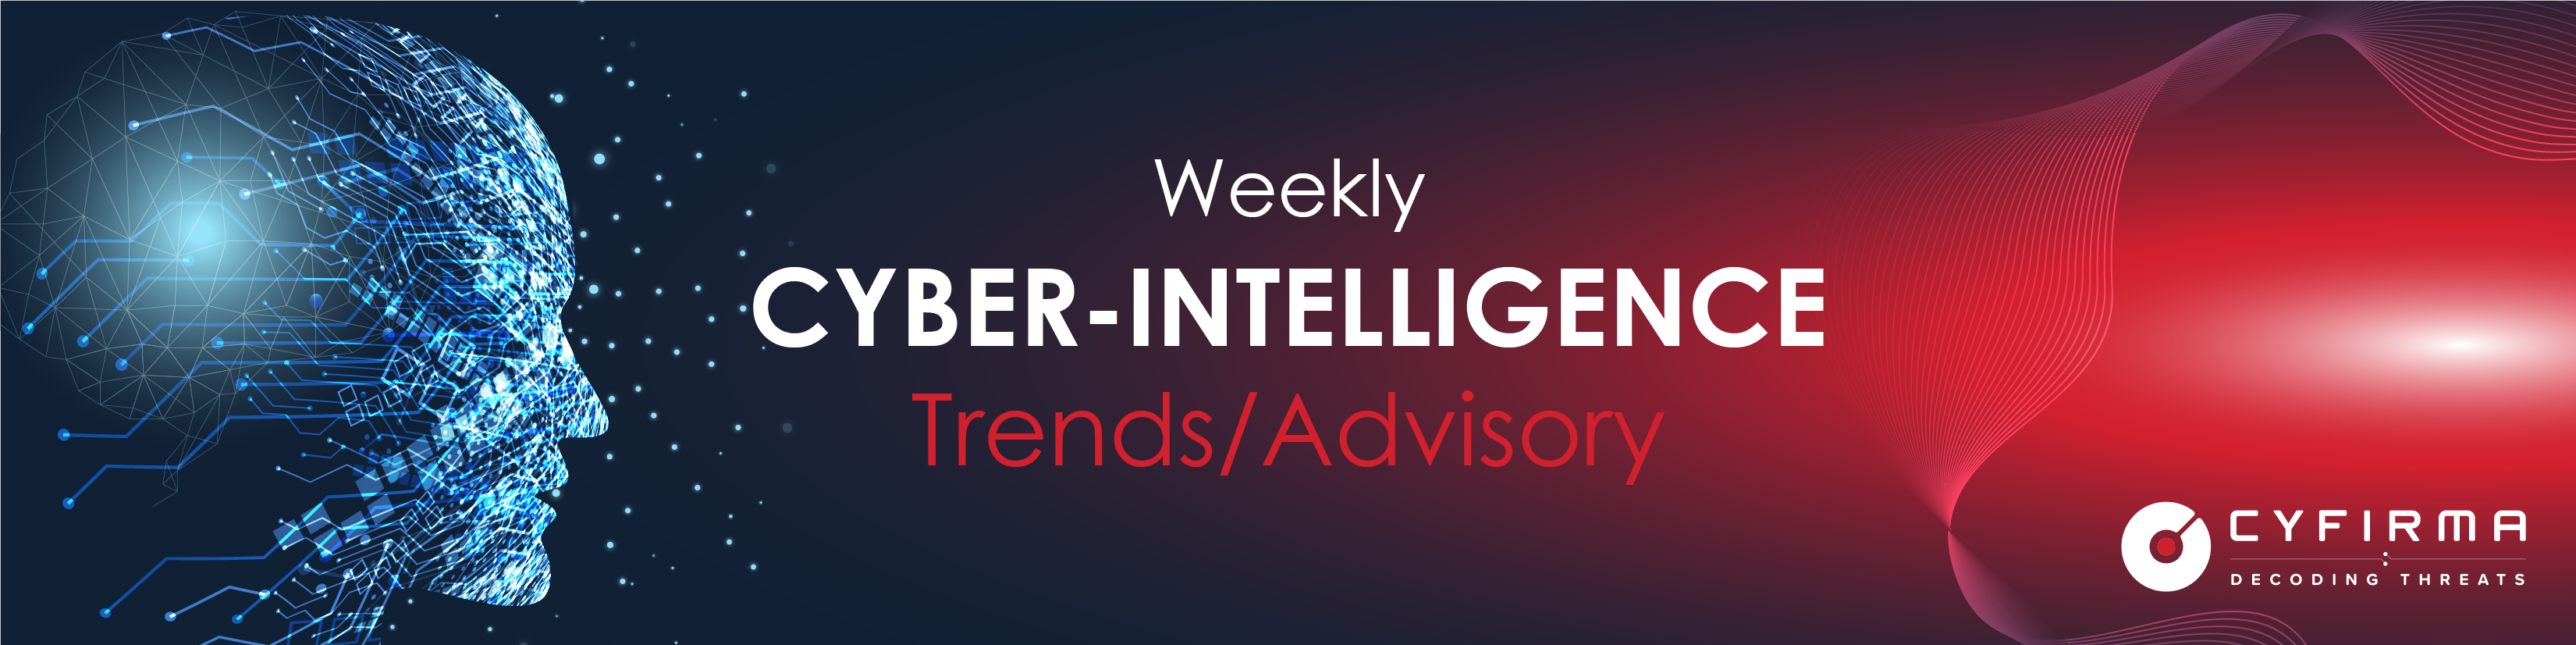 Weekly Intelligence Trends and Advisory | Threat Actor in Focus | Rise in Malware, Ransomware, Phishing | Vulnerability and Exploits – 21 Nov 2021